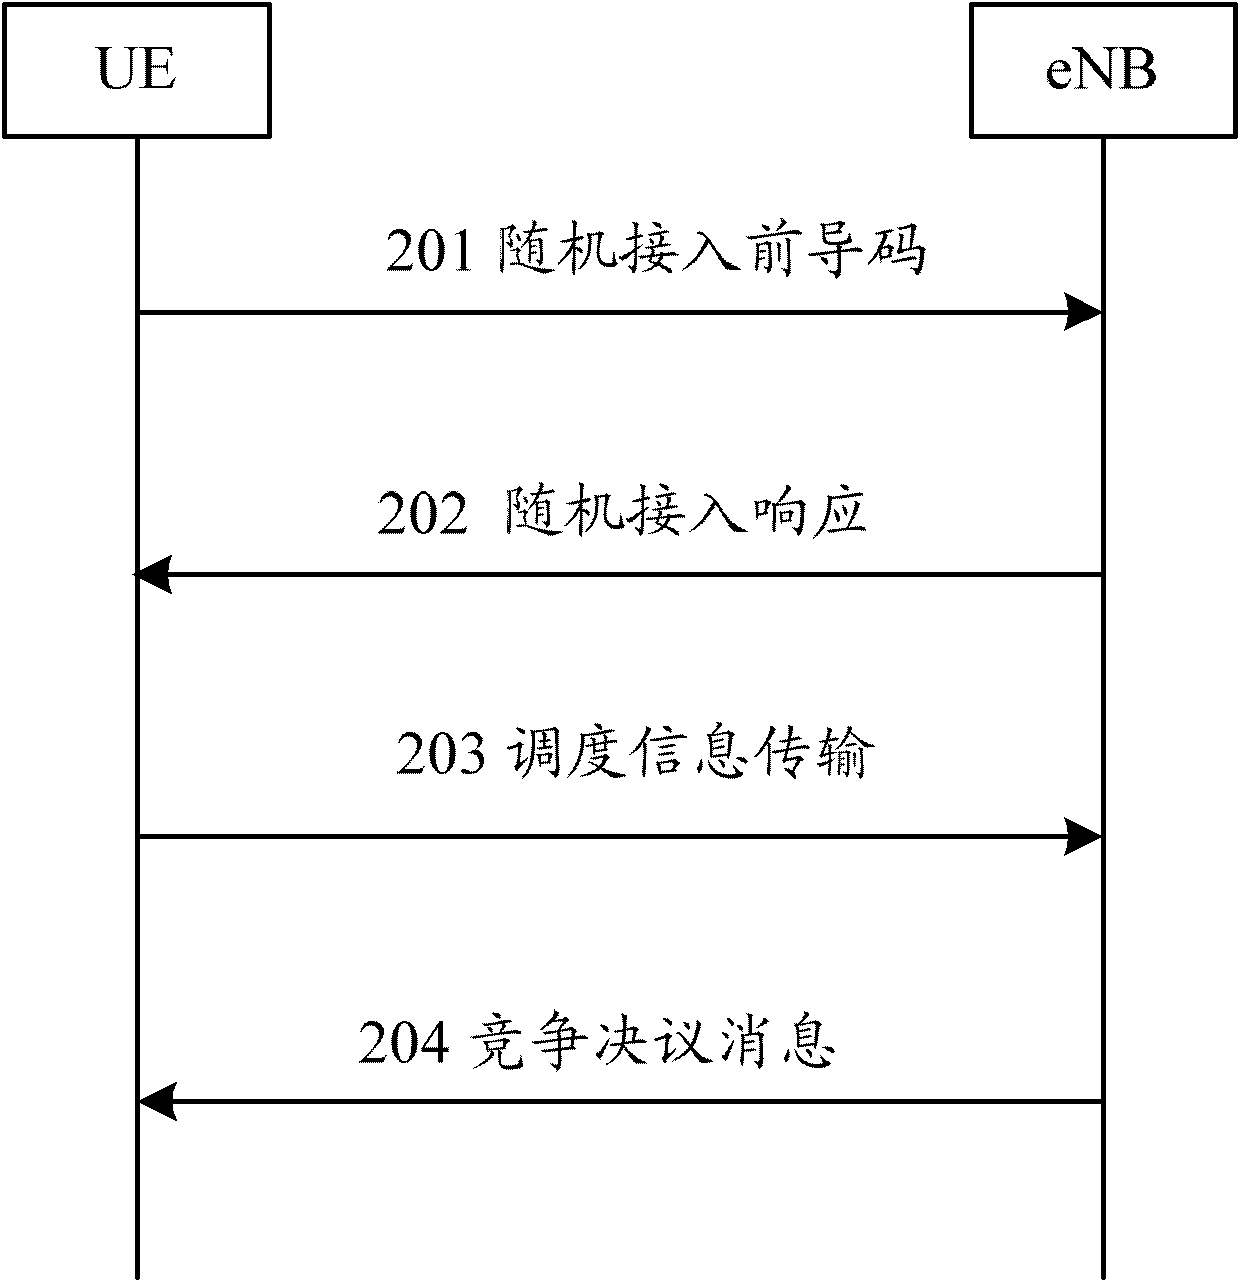 Terminal frequency point mapping and configuring method